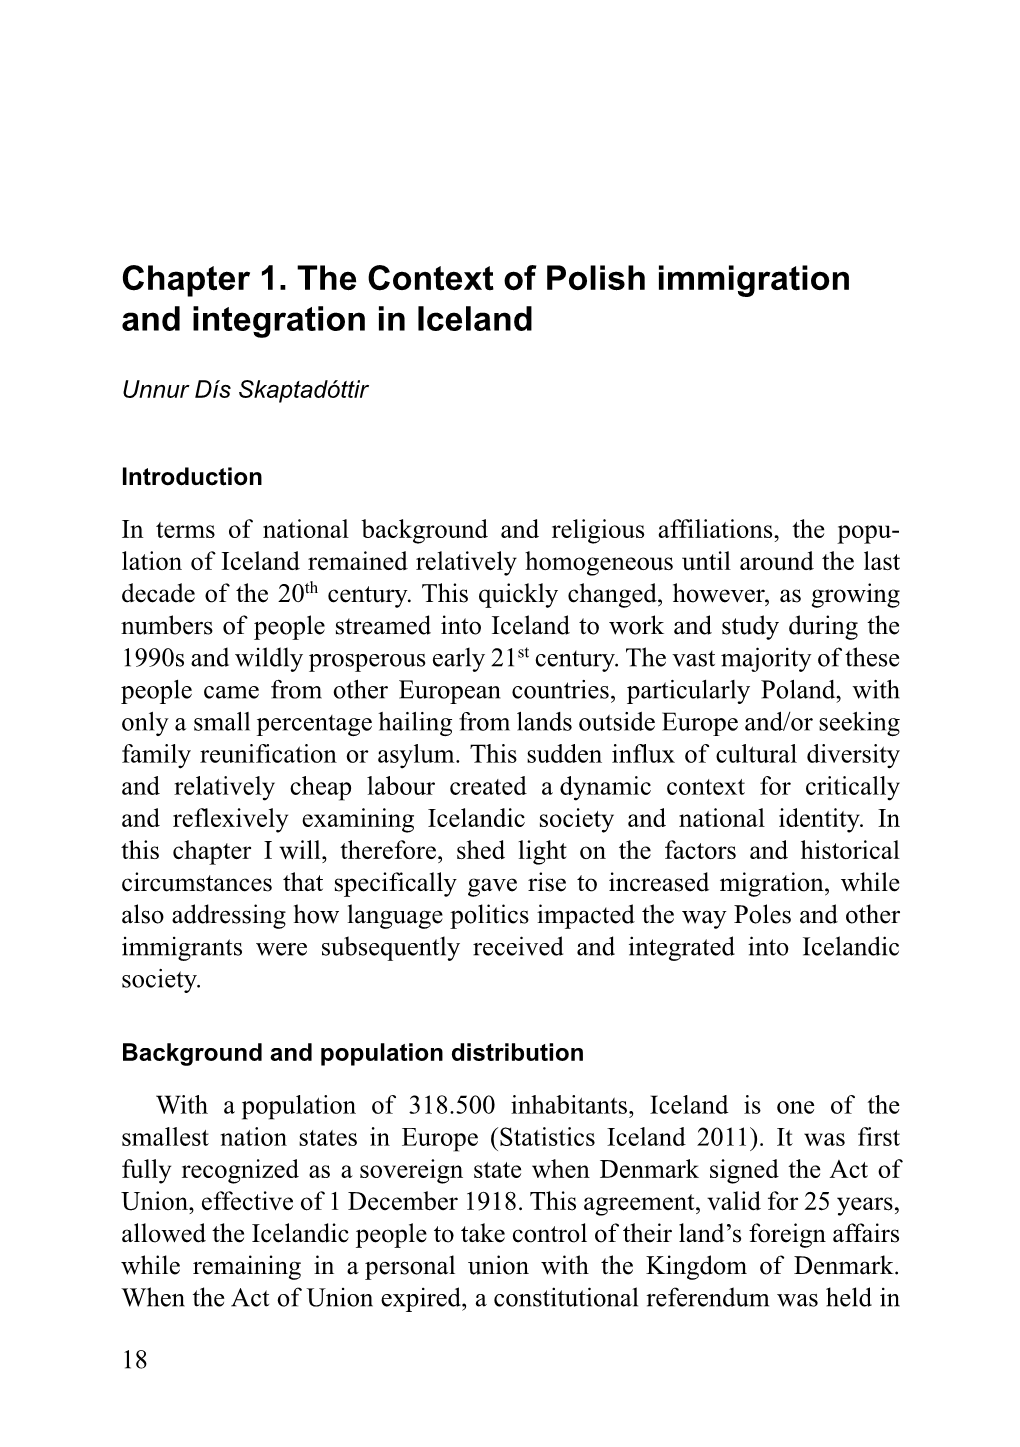 Chapter 1. the Context of Polish Immigration and Integration in Iceland